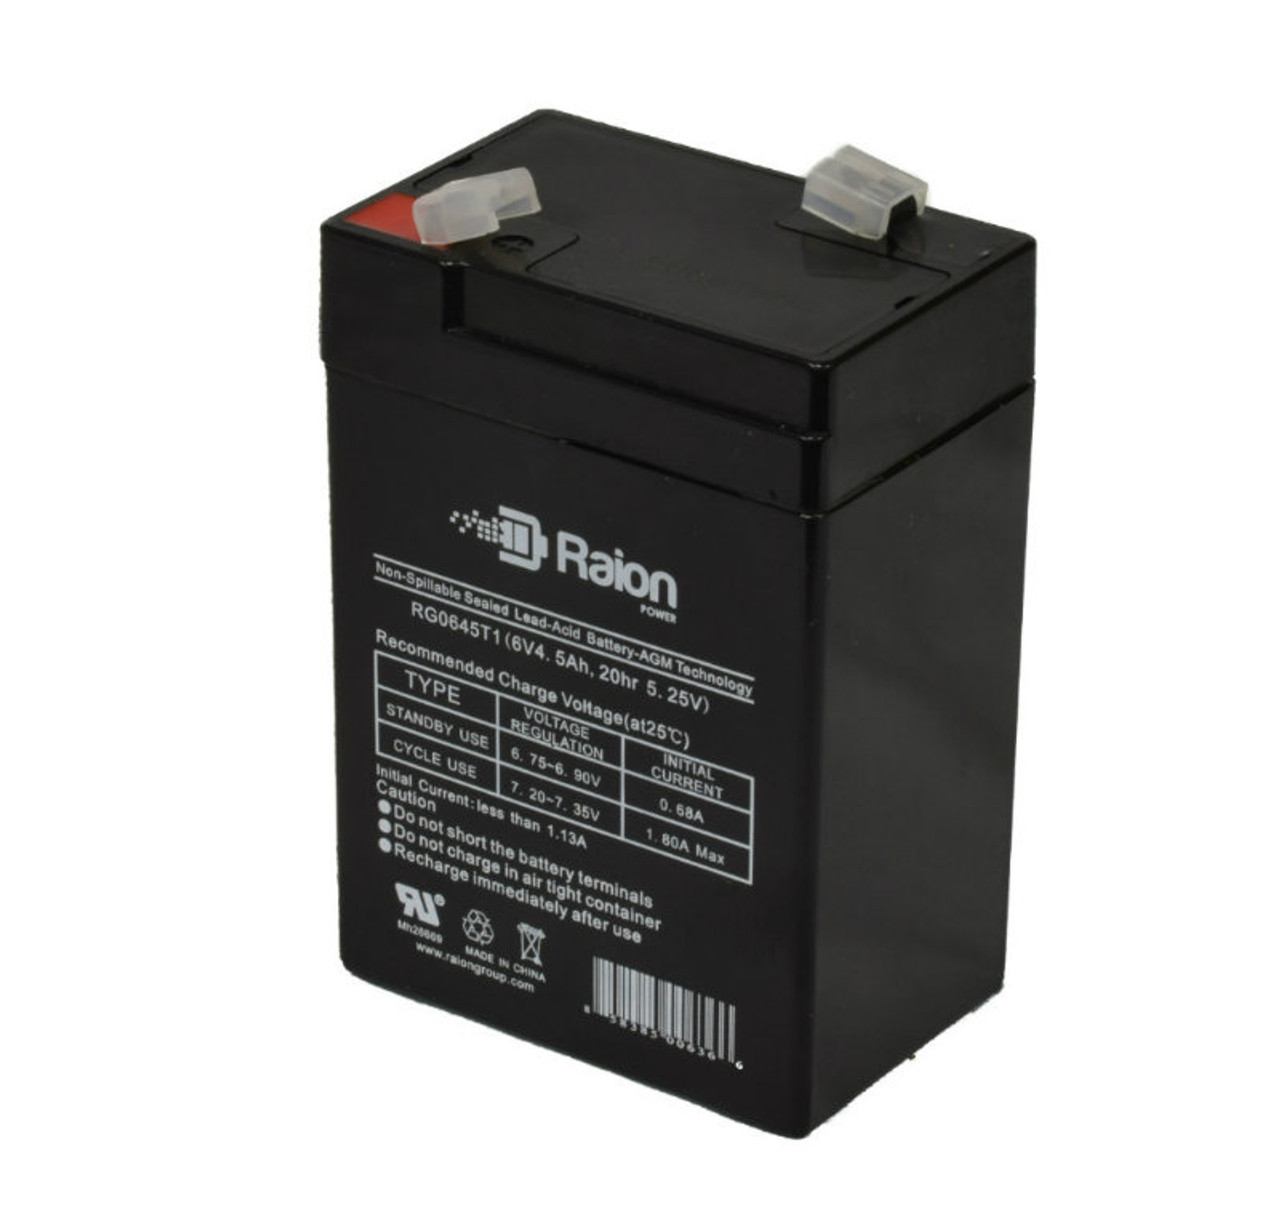 Raion Power RG0645T1 6V 4.5Ah Replacement Battery Cartridge for Baxter Healthcare 2001 Microate Inf Pump